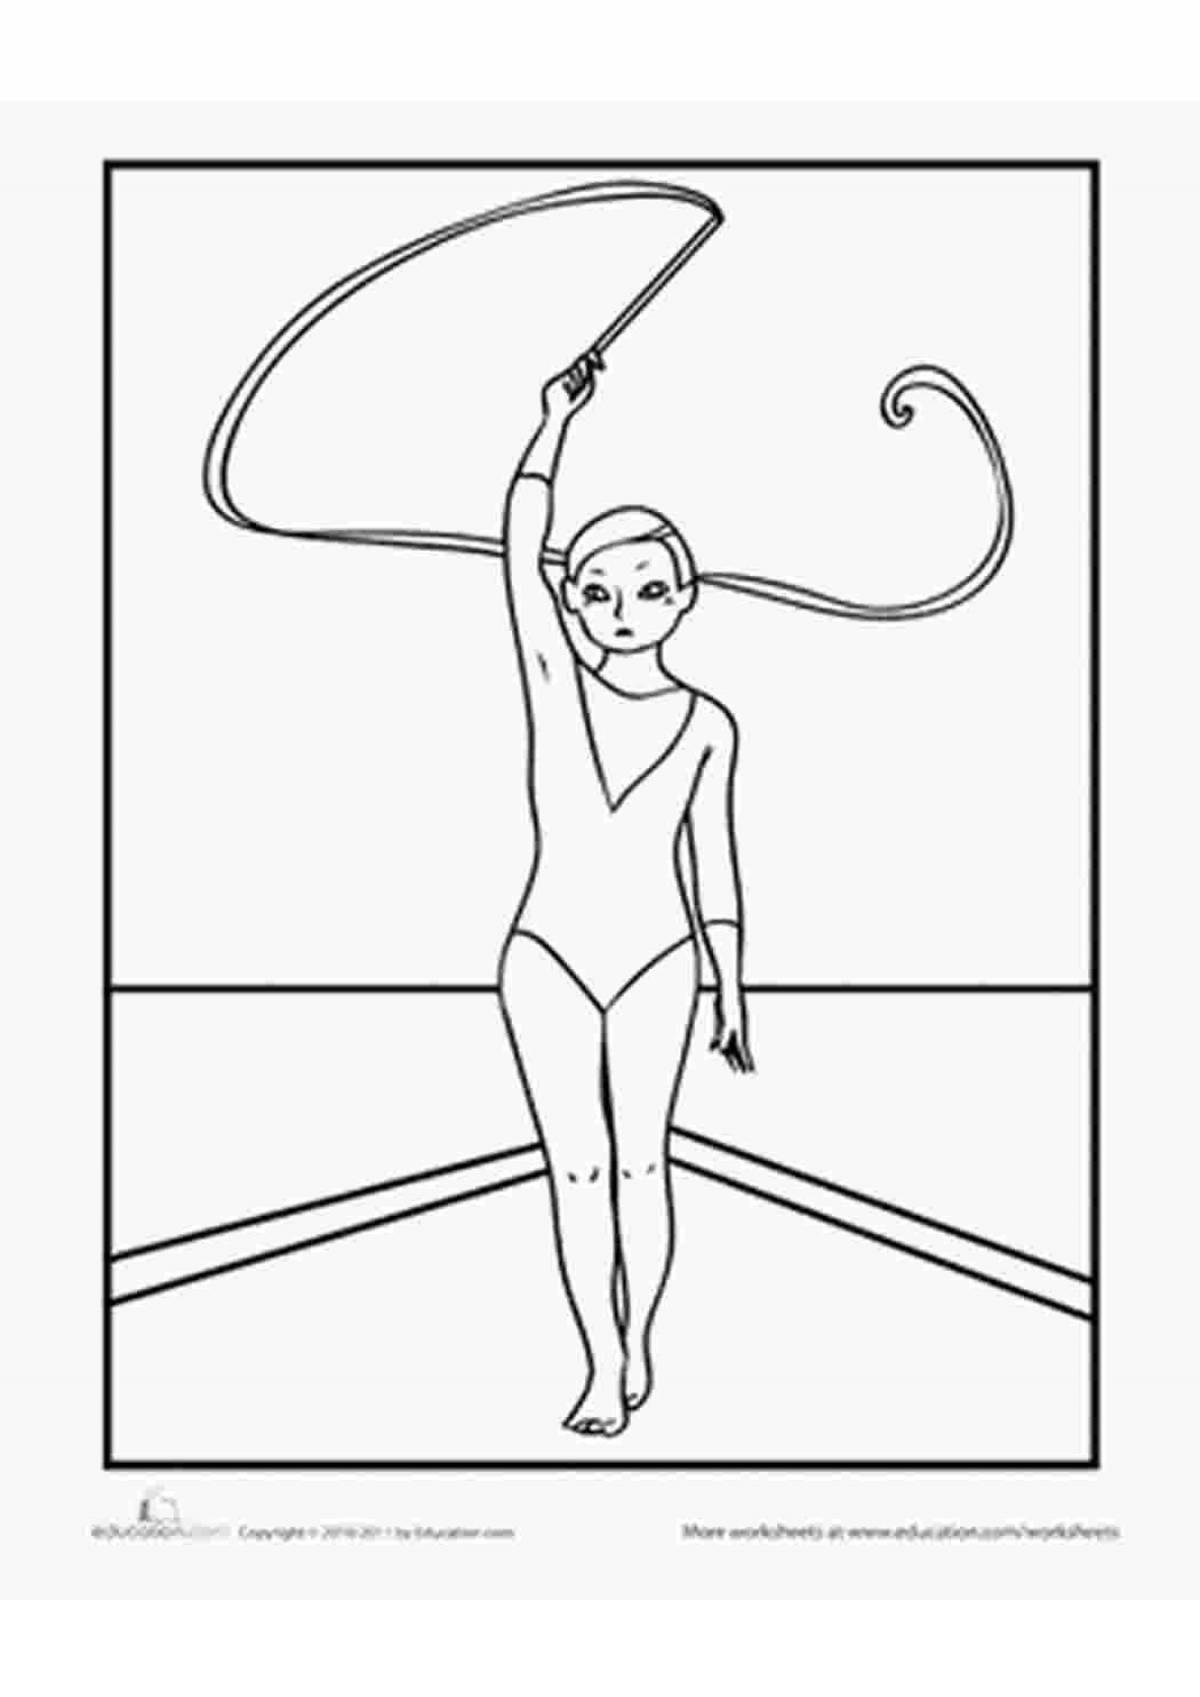 Resolute gymnast with ribbon